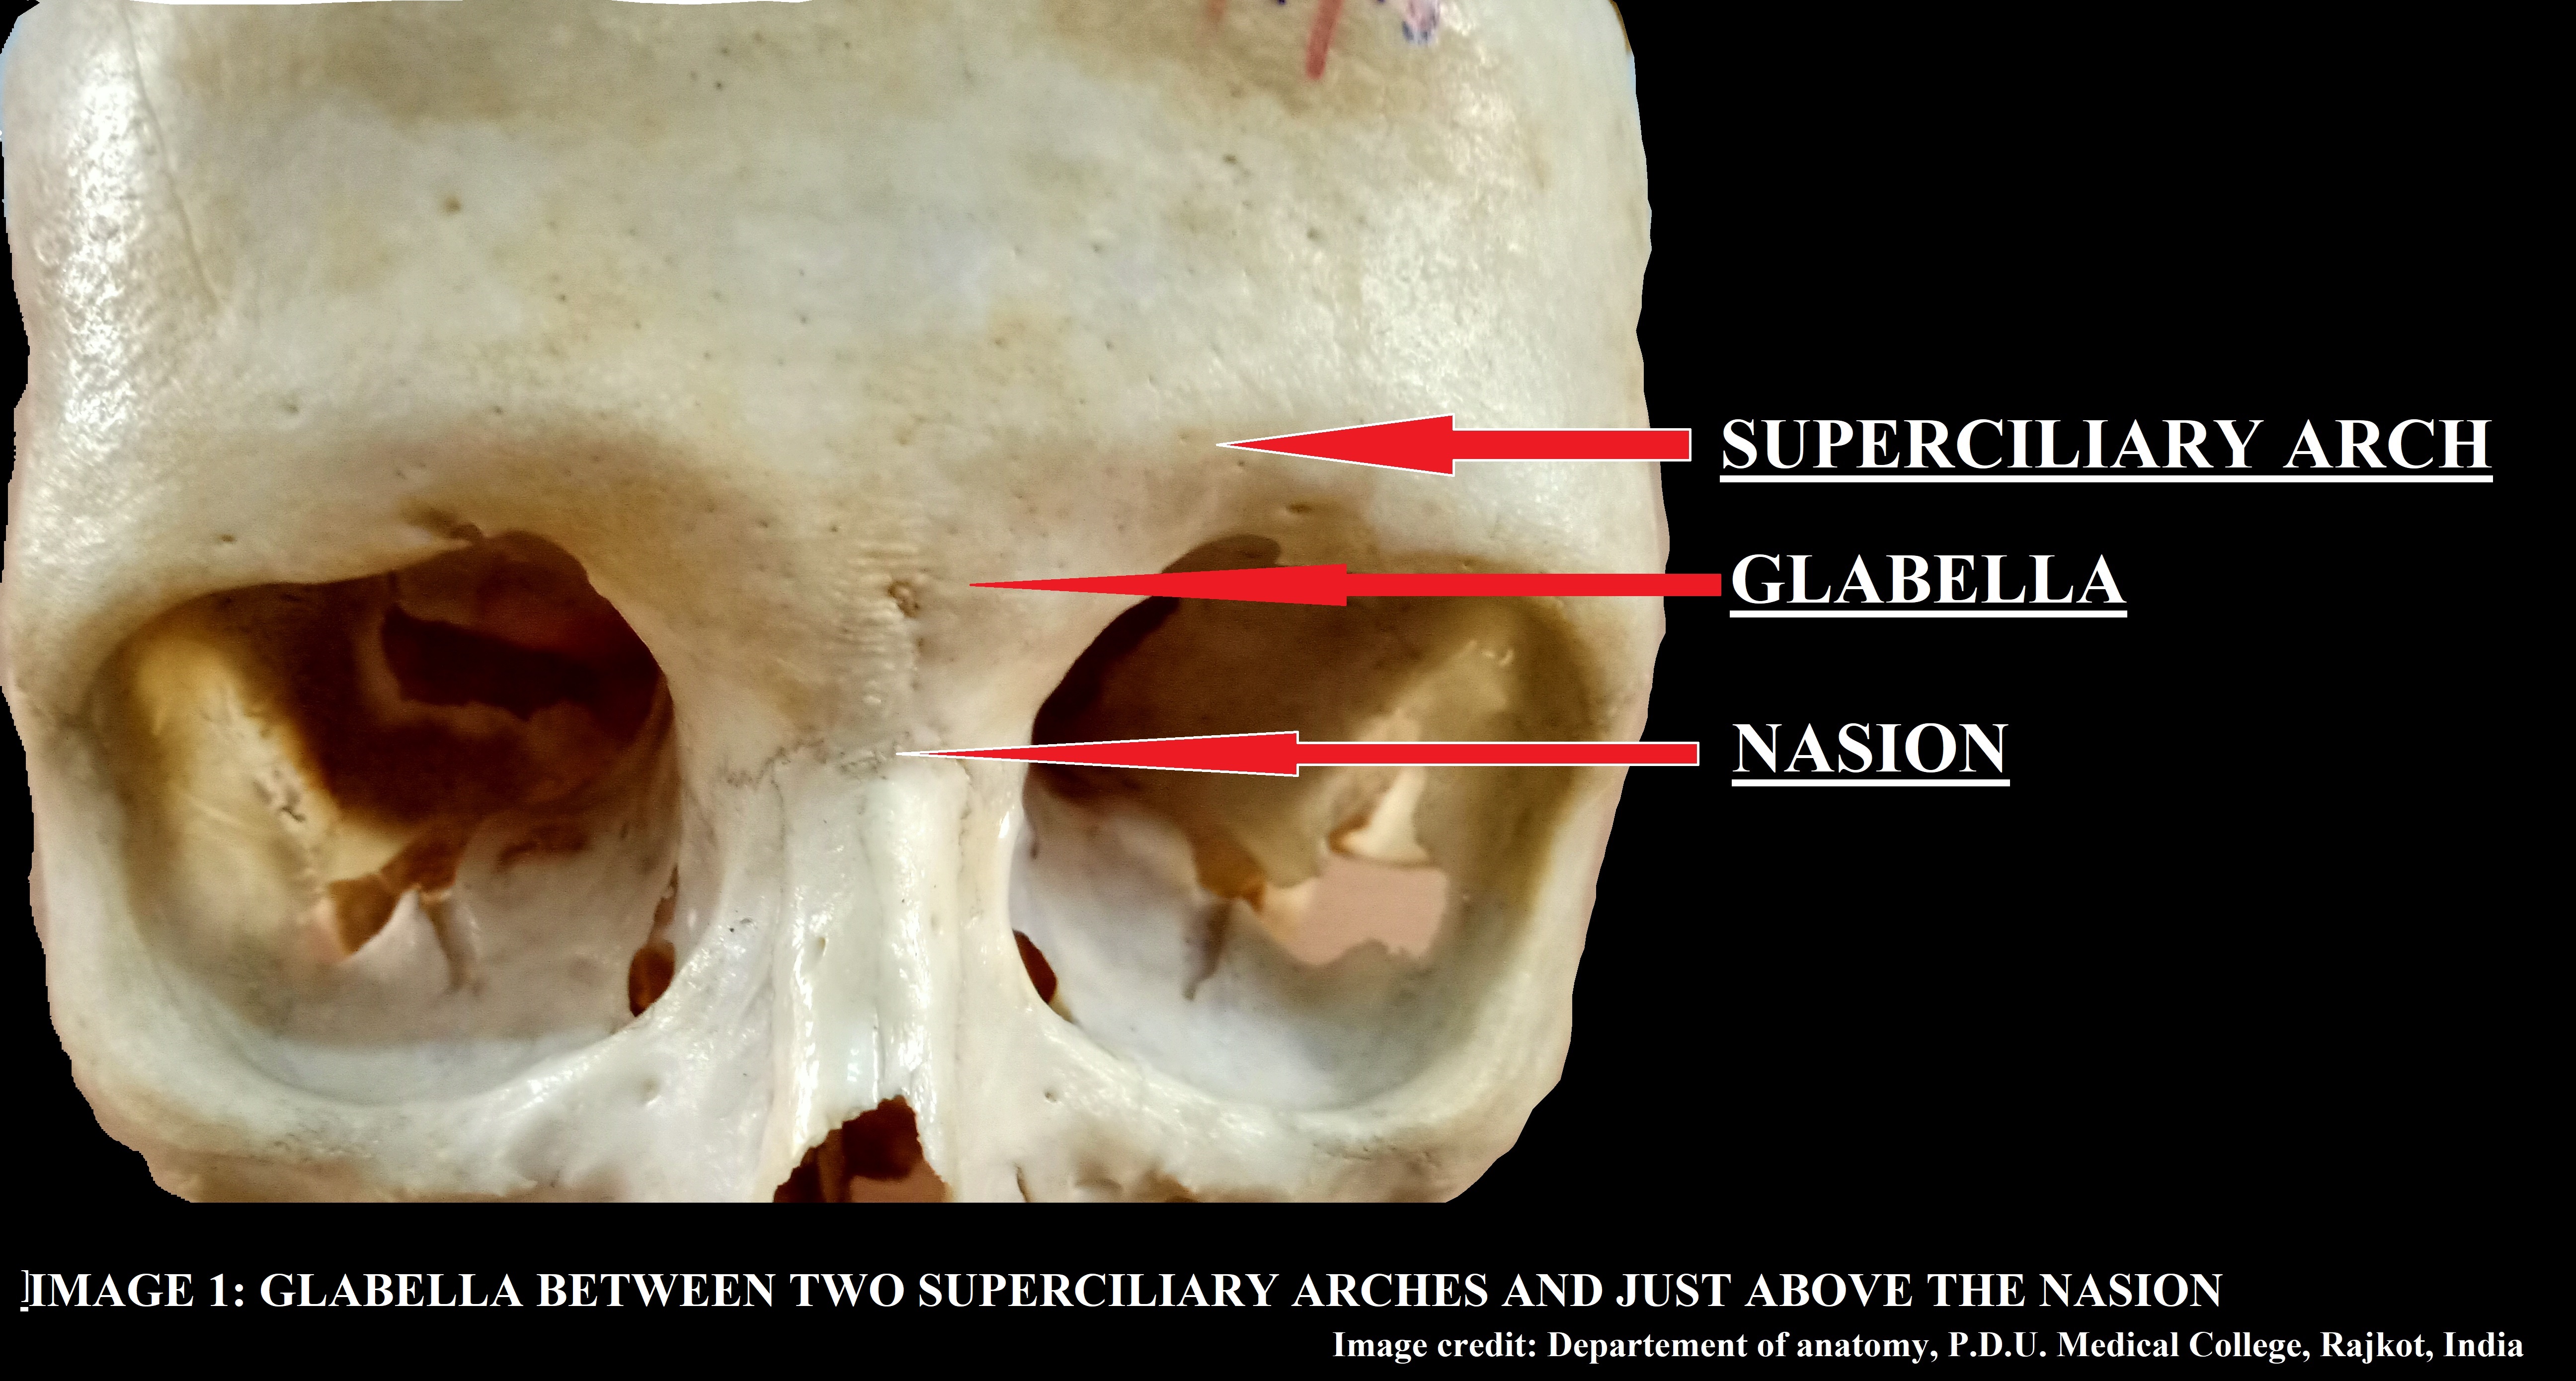 Front of the skull showing Glabella, Superciliary arch and Nasion.